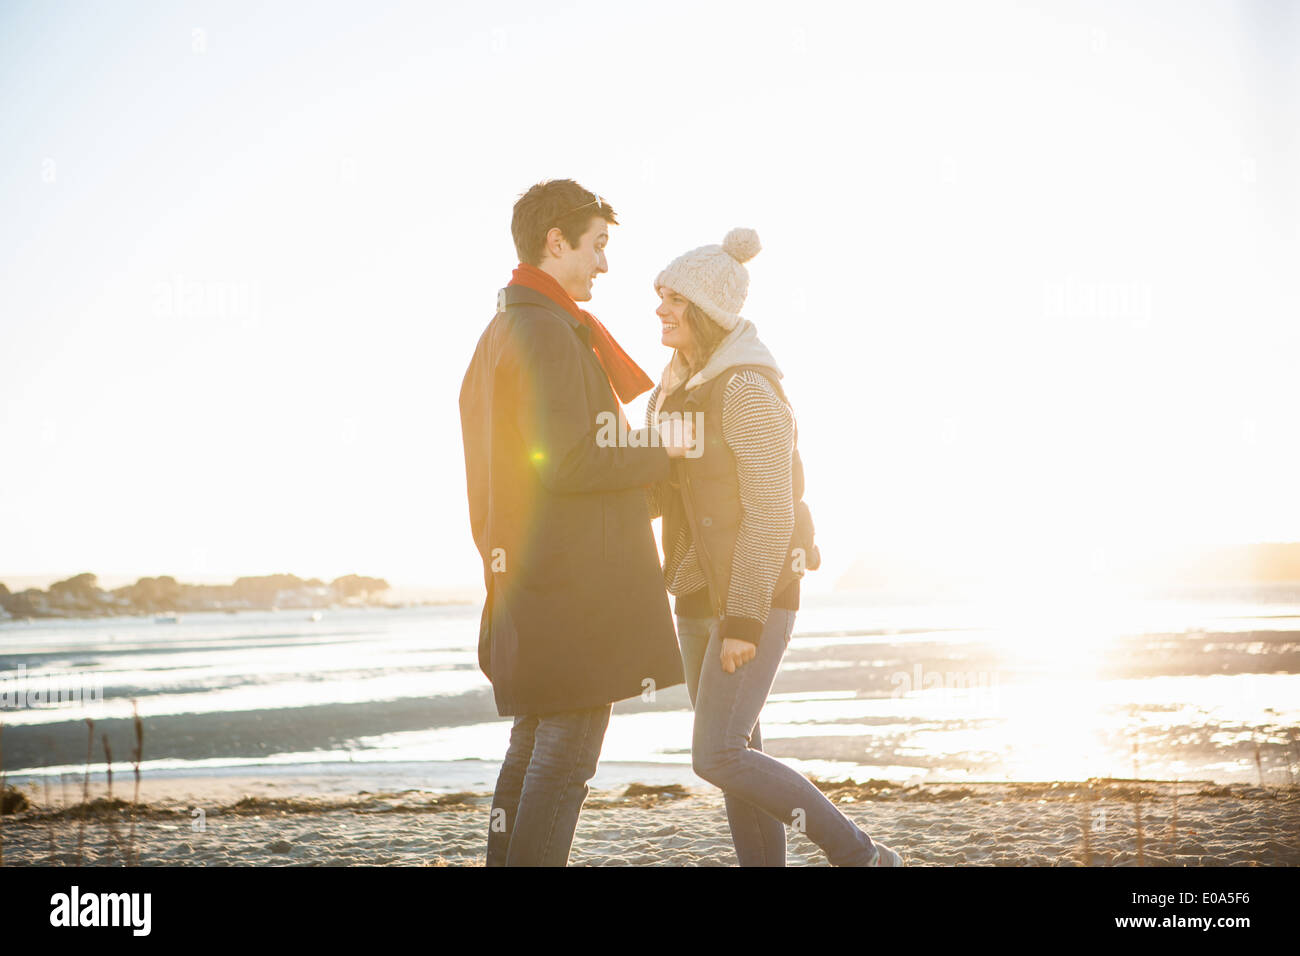 Romantic couple face to face on the beach Stock Photo